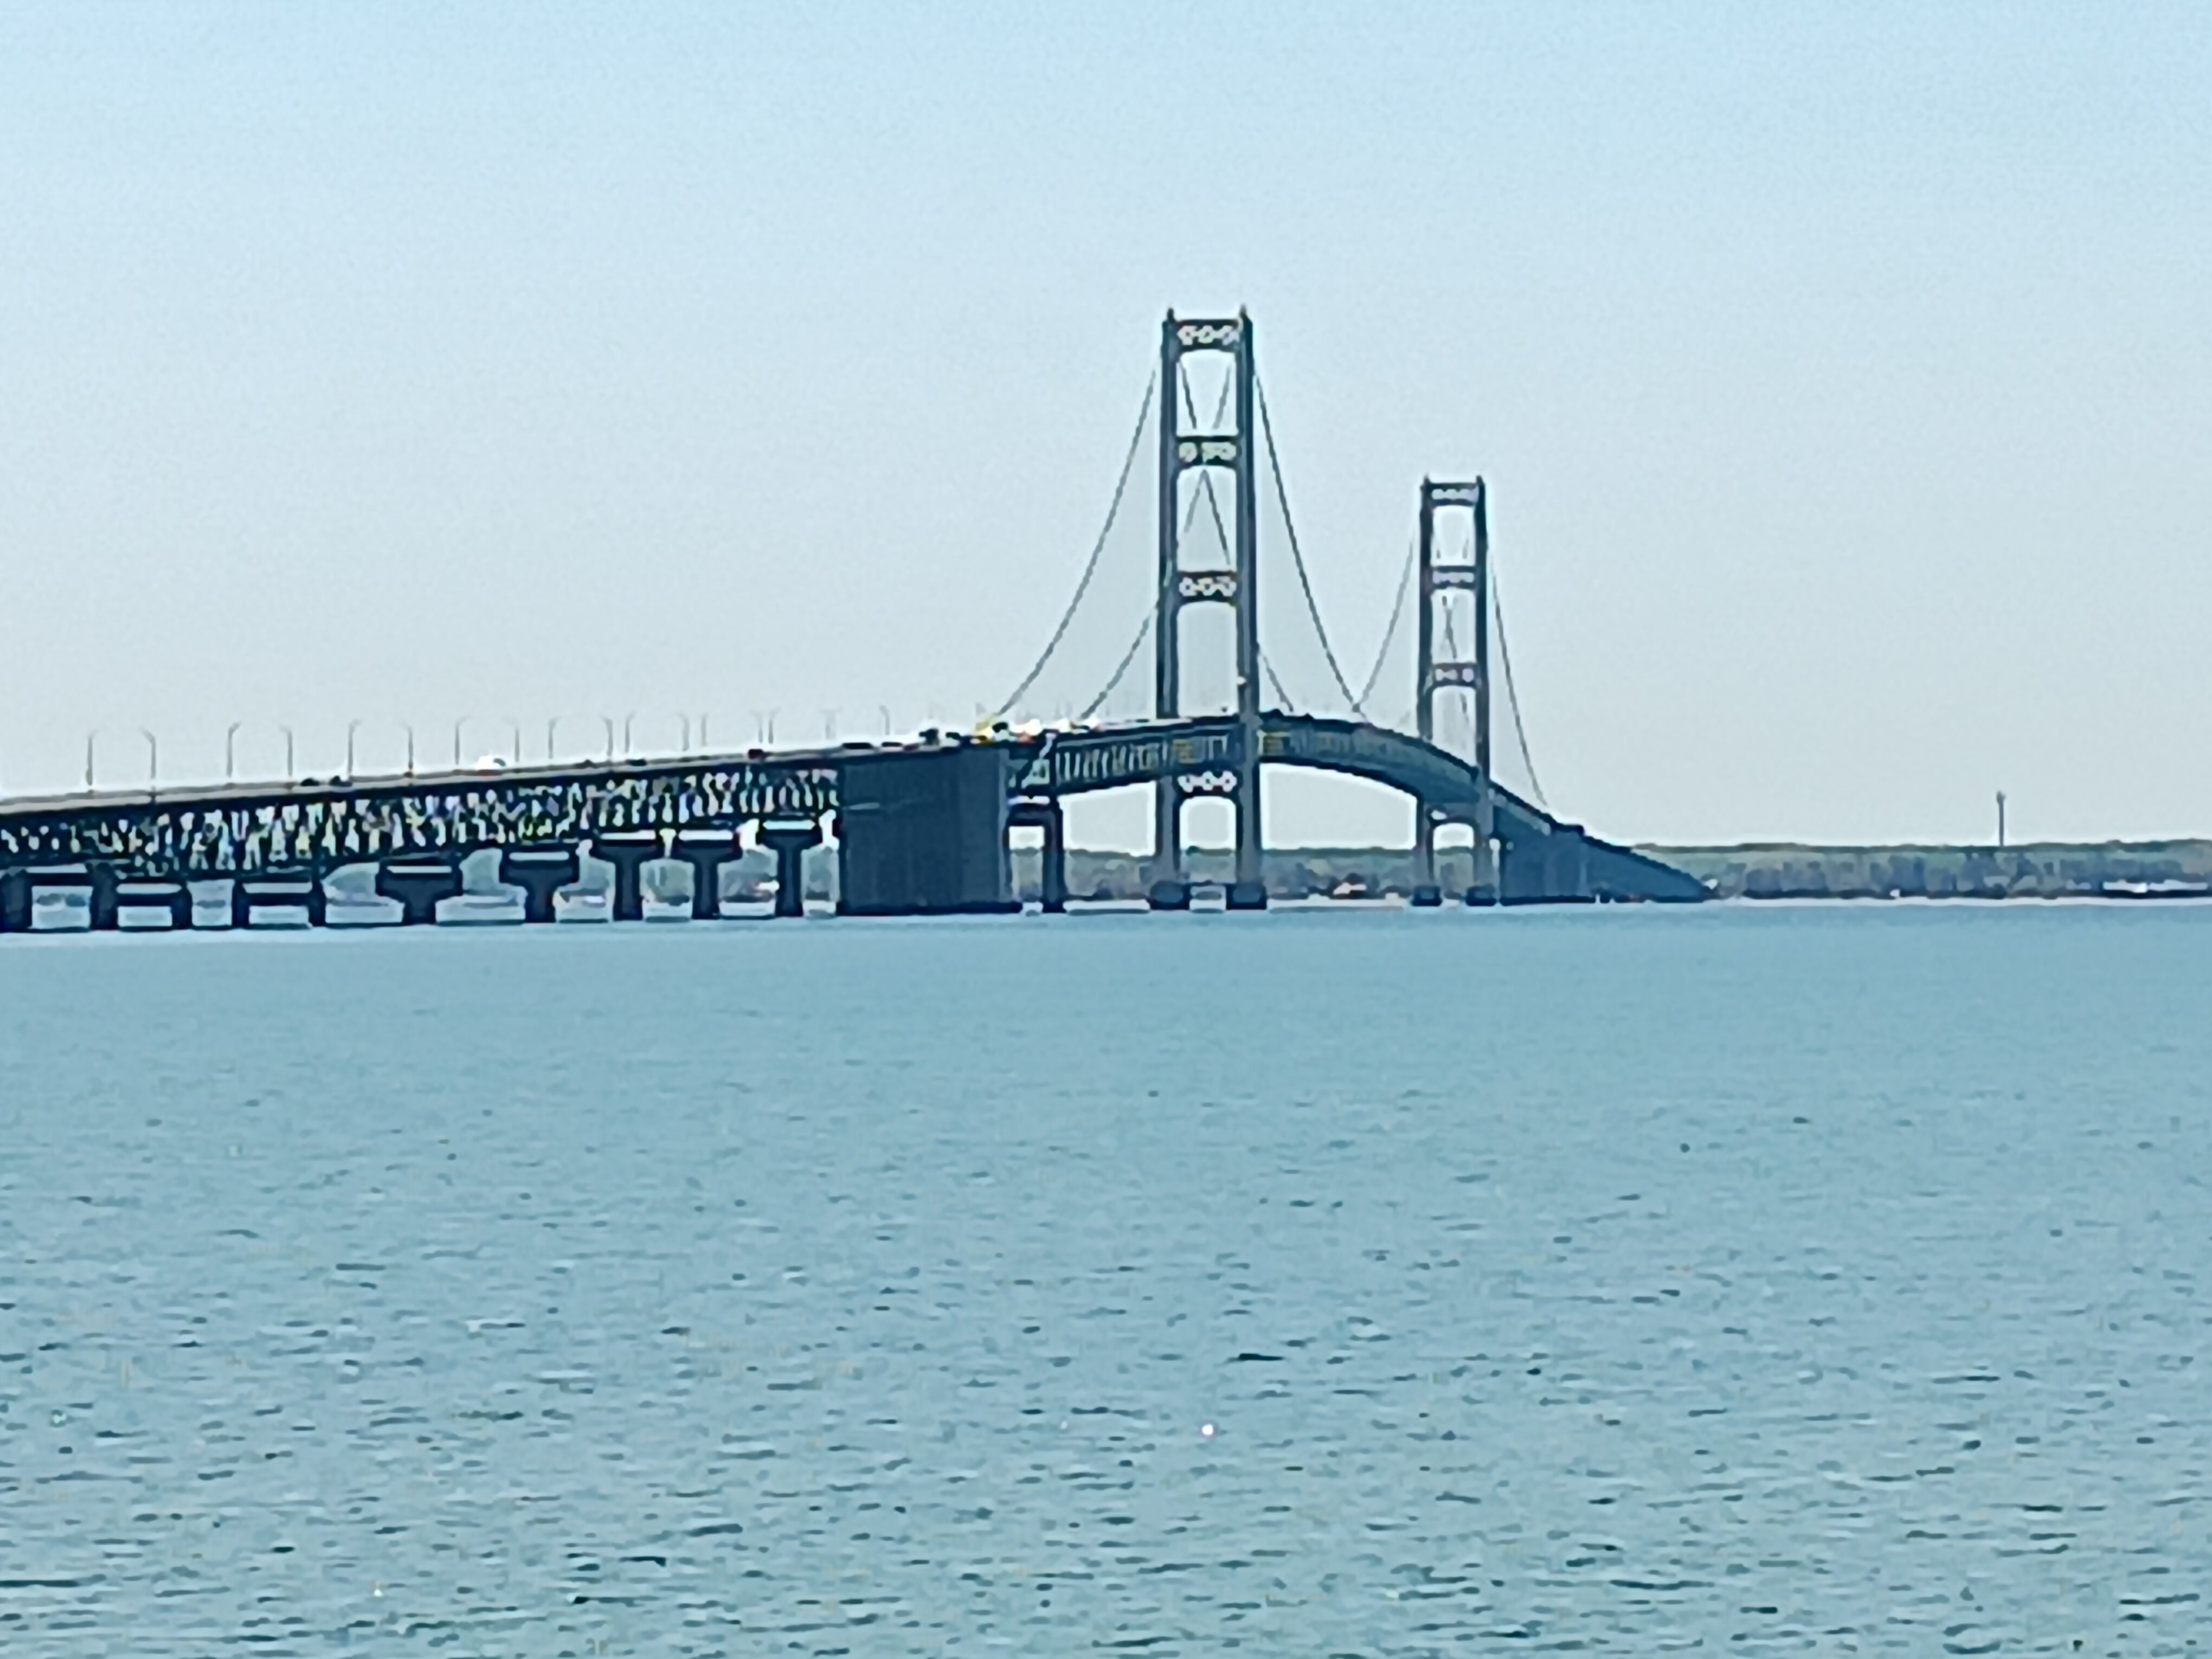 The Mighty Mac Bridge connecting Michigan's Upper Peninsula to the lower part of the state